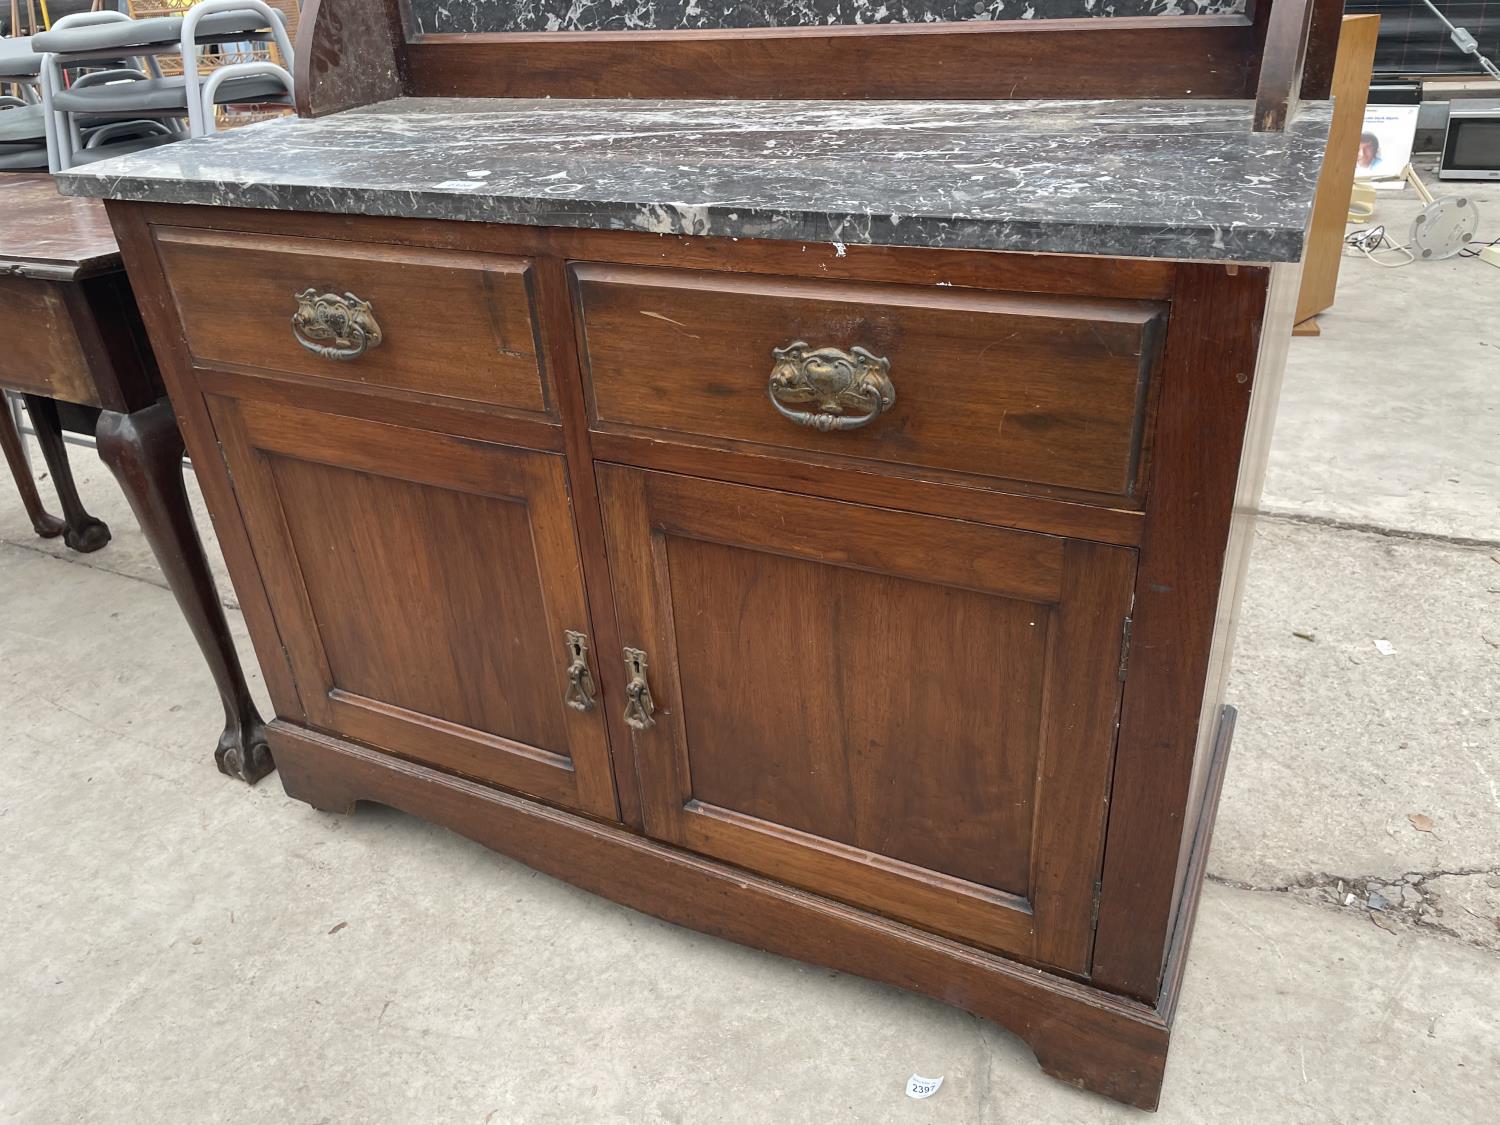 A VICTORIAN MAHOGANY MARBLE TOP WASHSTAND WITH MARBLE BASE, 42" WIDE - Image 4 of 4